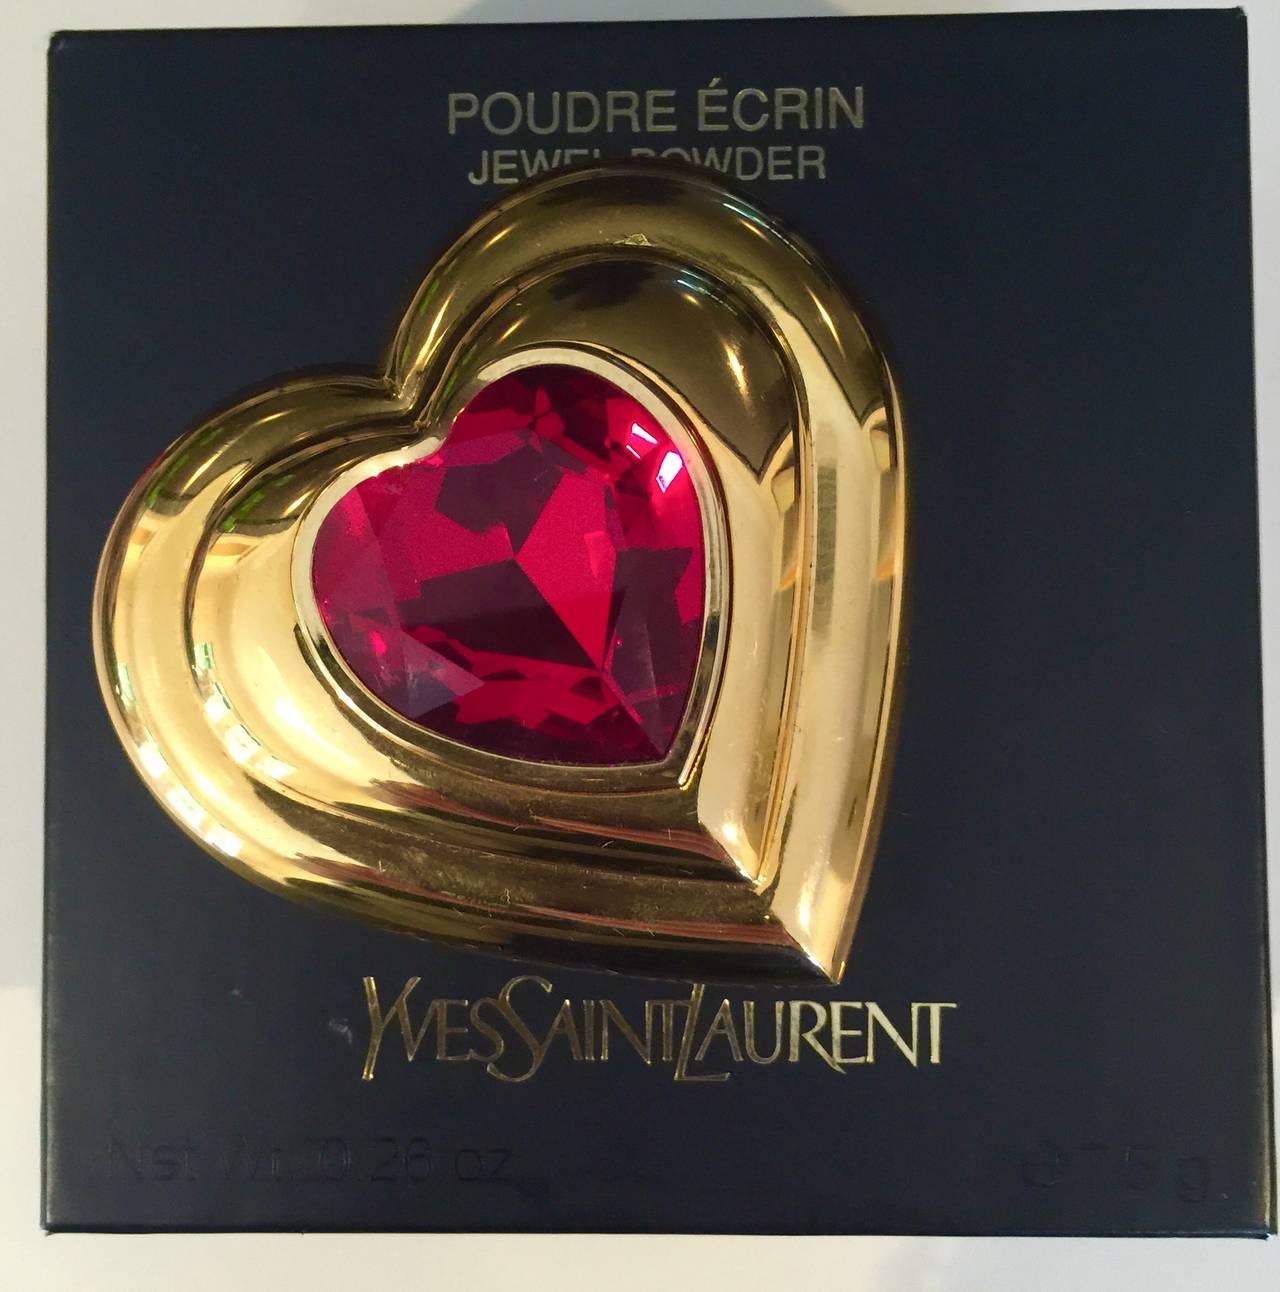 New Yves Saint Laurent Heart shaped Poudre Ecrin -Gold plated Jewel Powder Compact. Jewel  lid set with a Sparkly ruby red  stone. 
Interior Mirror. Made in France. Brand new in original box, never used. Beautiful, Collectable.

Measurements:
2.75